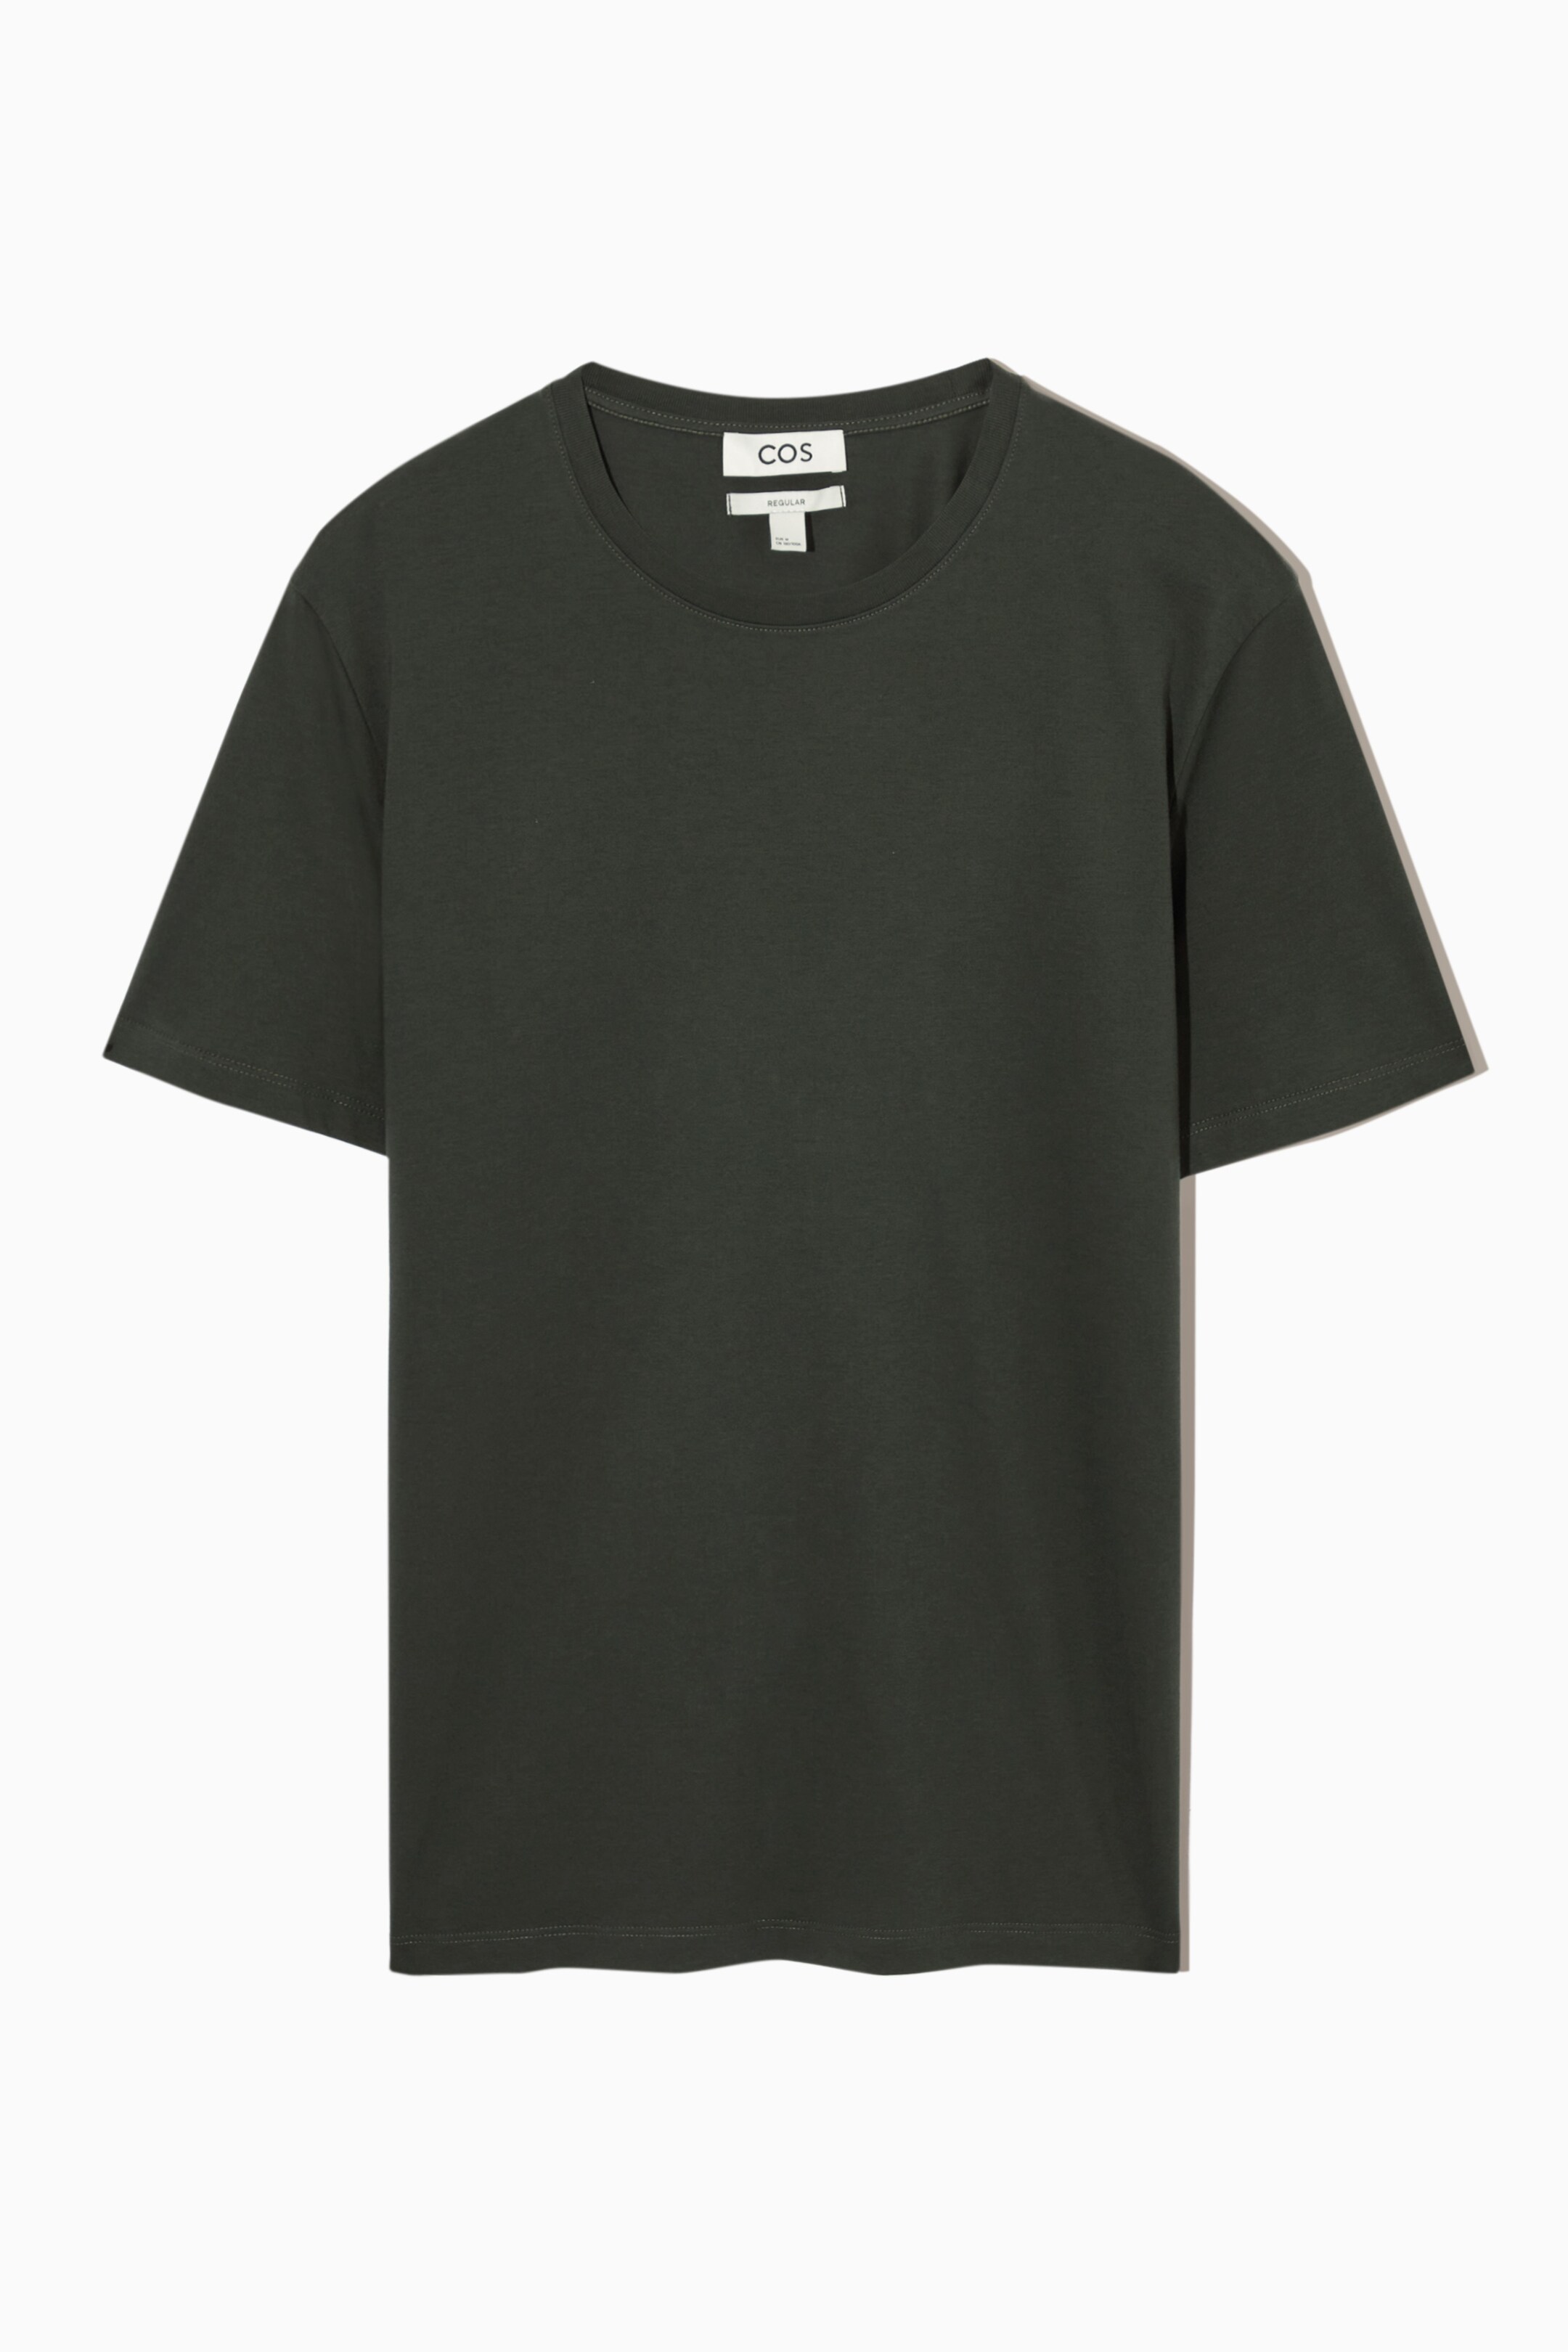 Front image of cos THE EXTRA FINE T-SHIRT in dark green